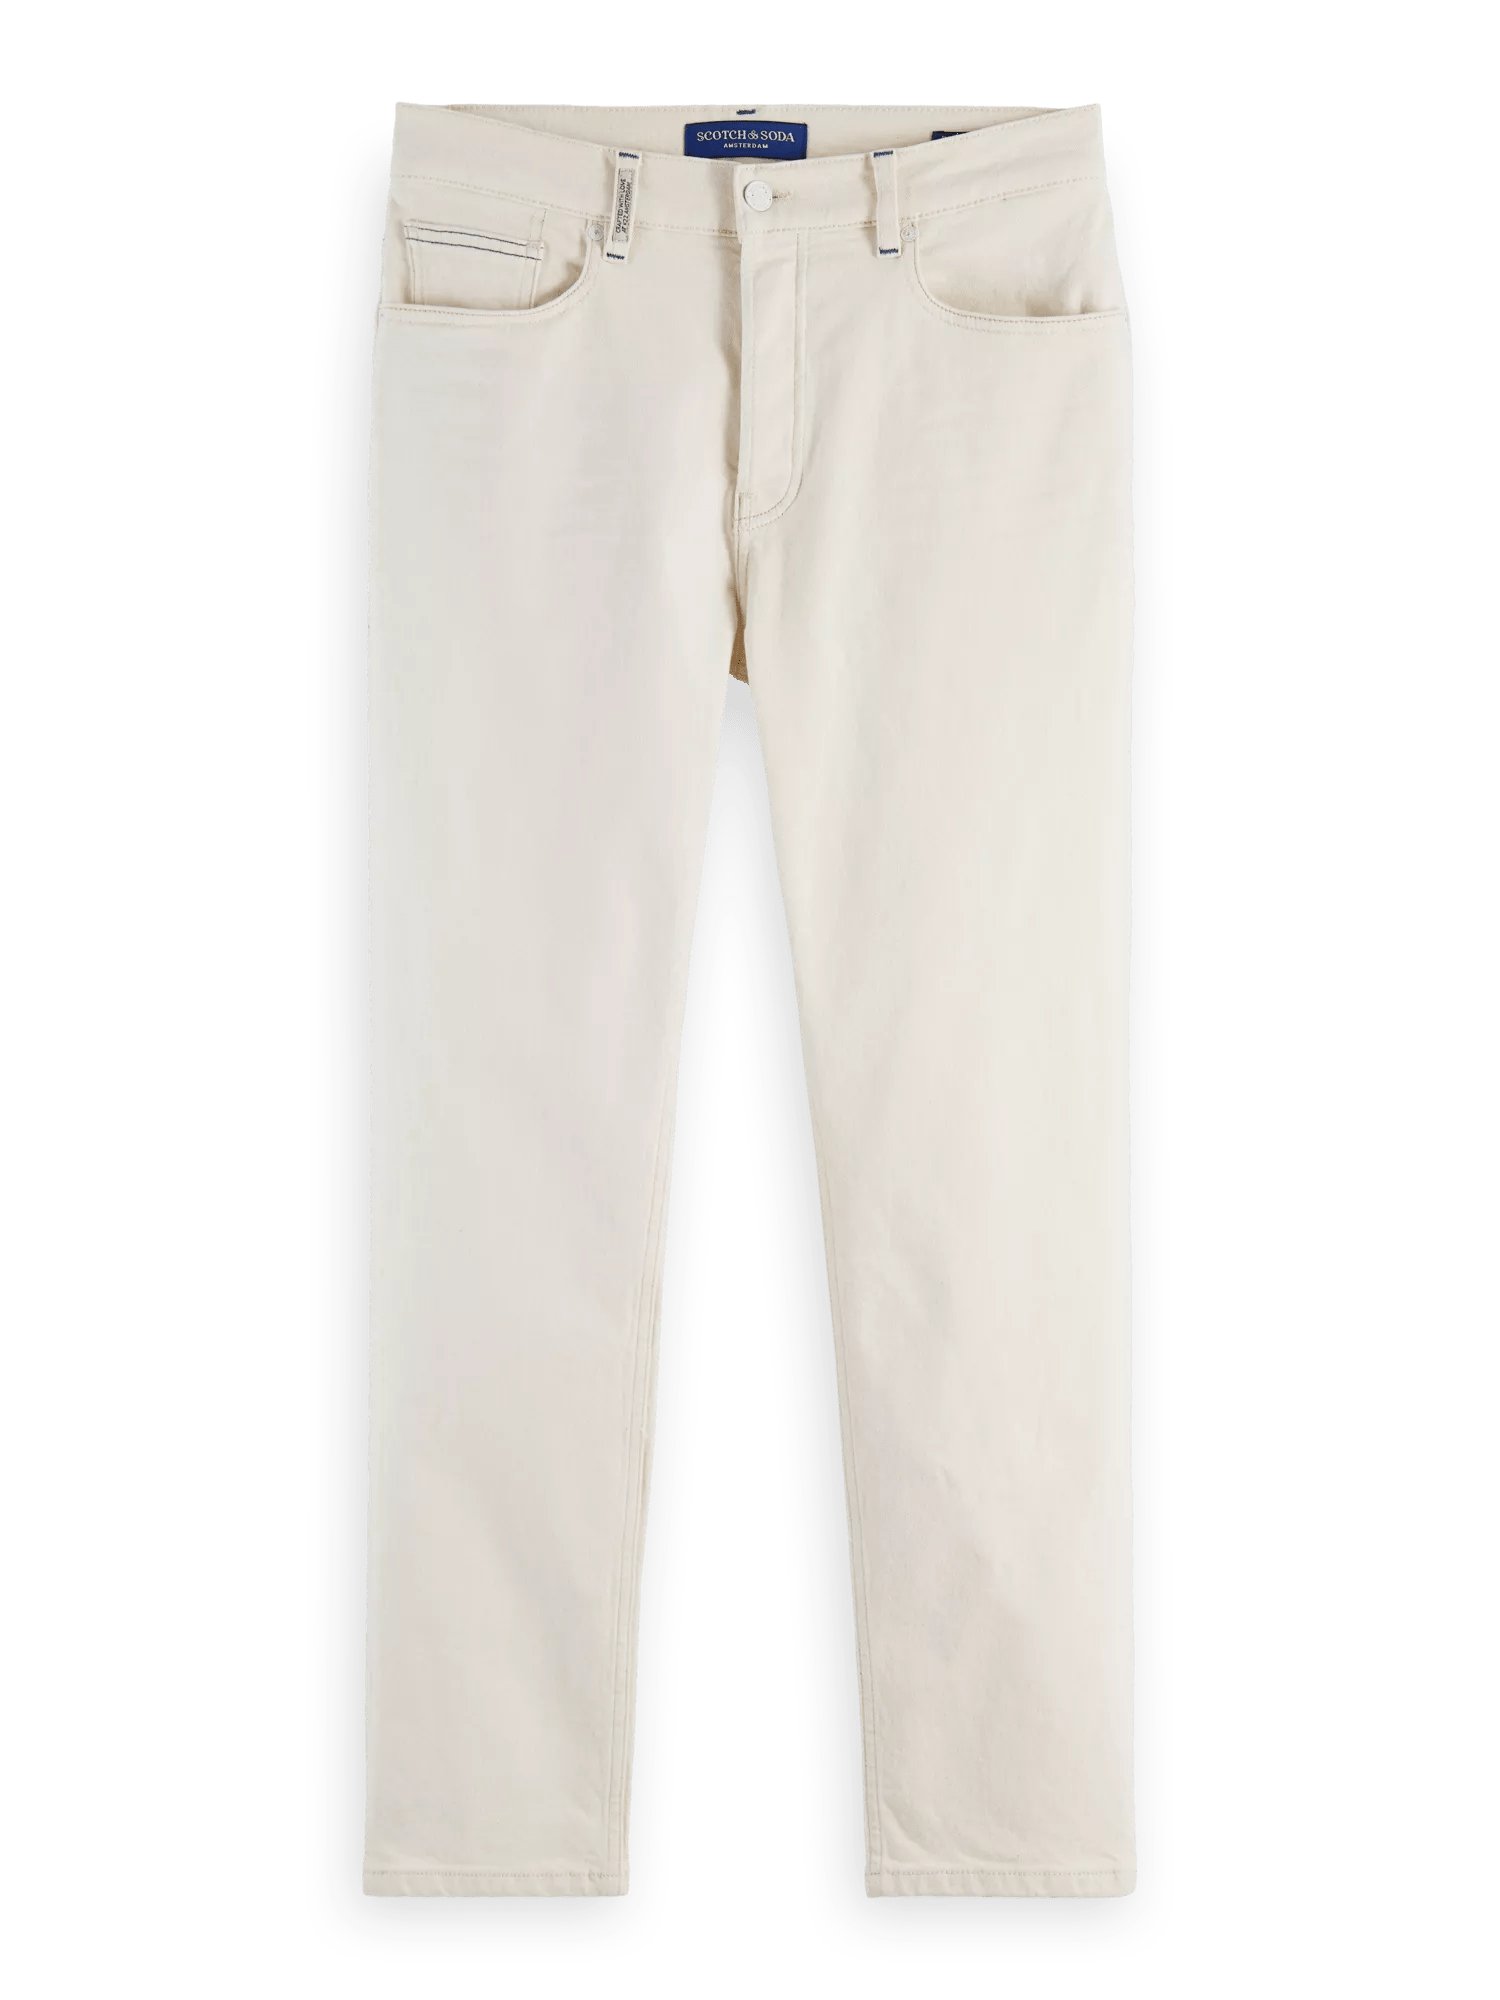 Scotch & Soda The Drop regular tapered jeans — Forget Me Not FNT